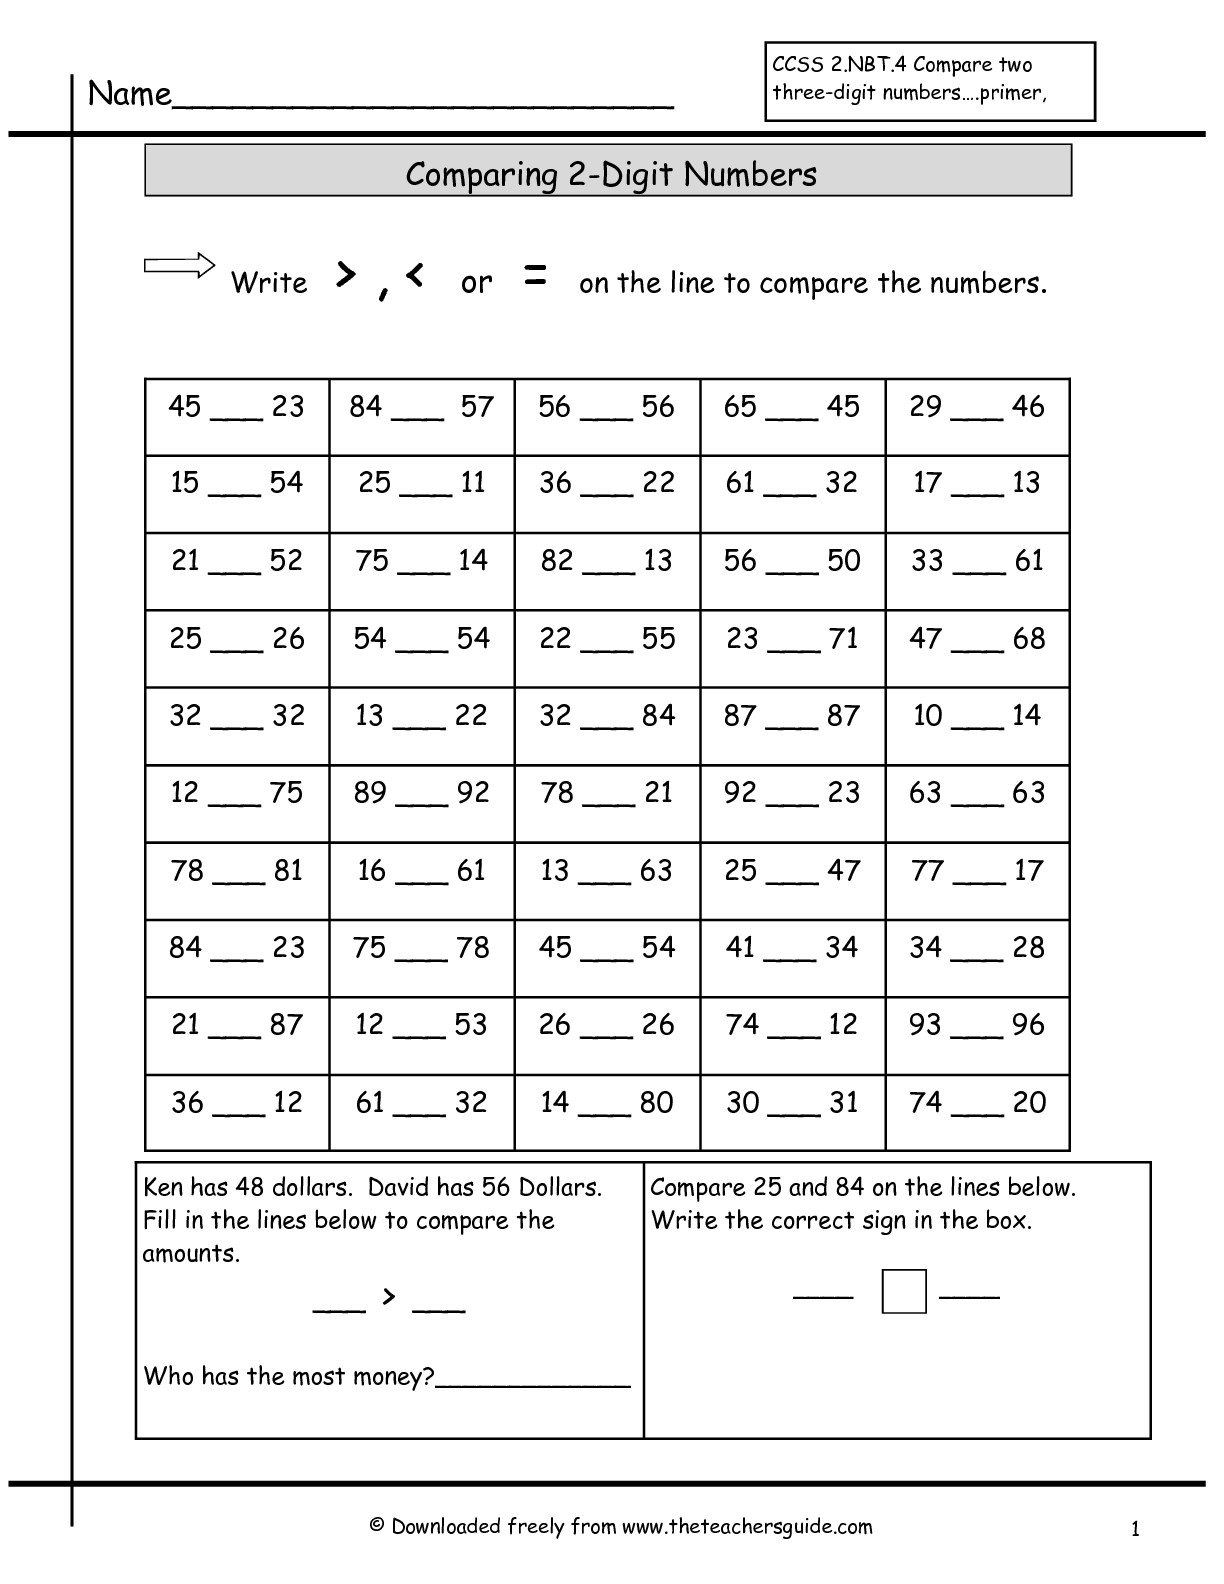 13-best-images-of-comparing-numbers-worksheet-free-comparing-mixed-numbers-worksheets